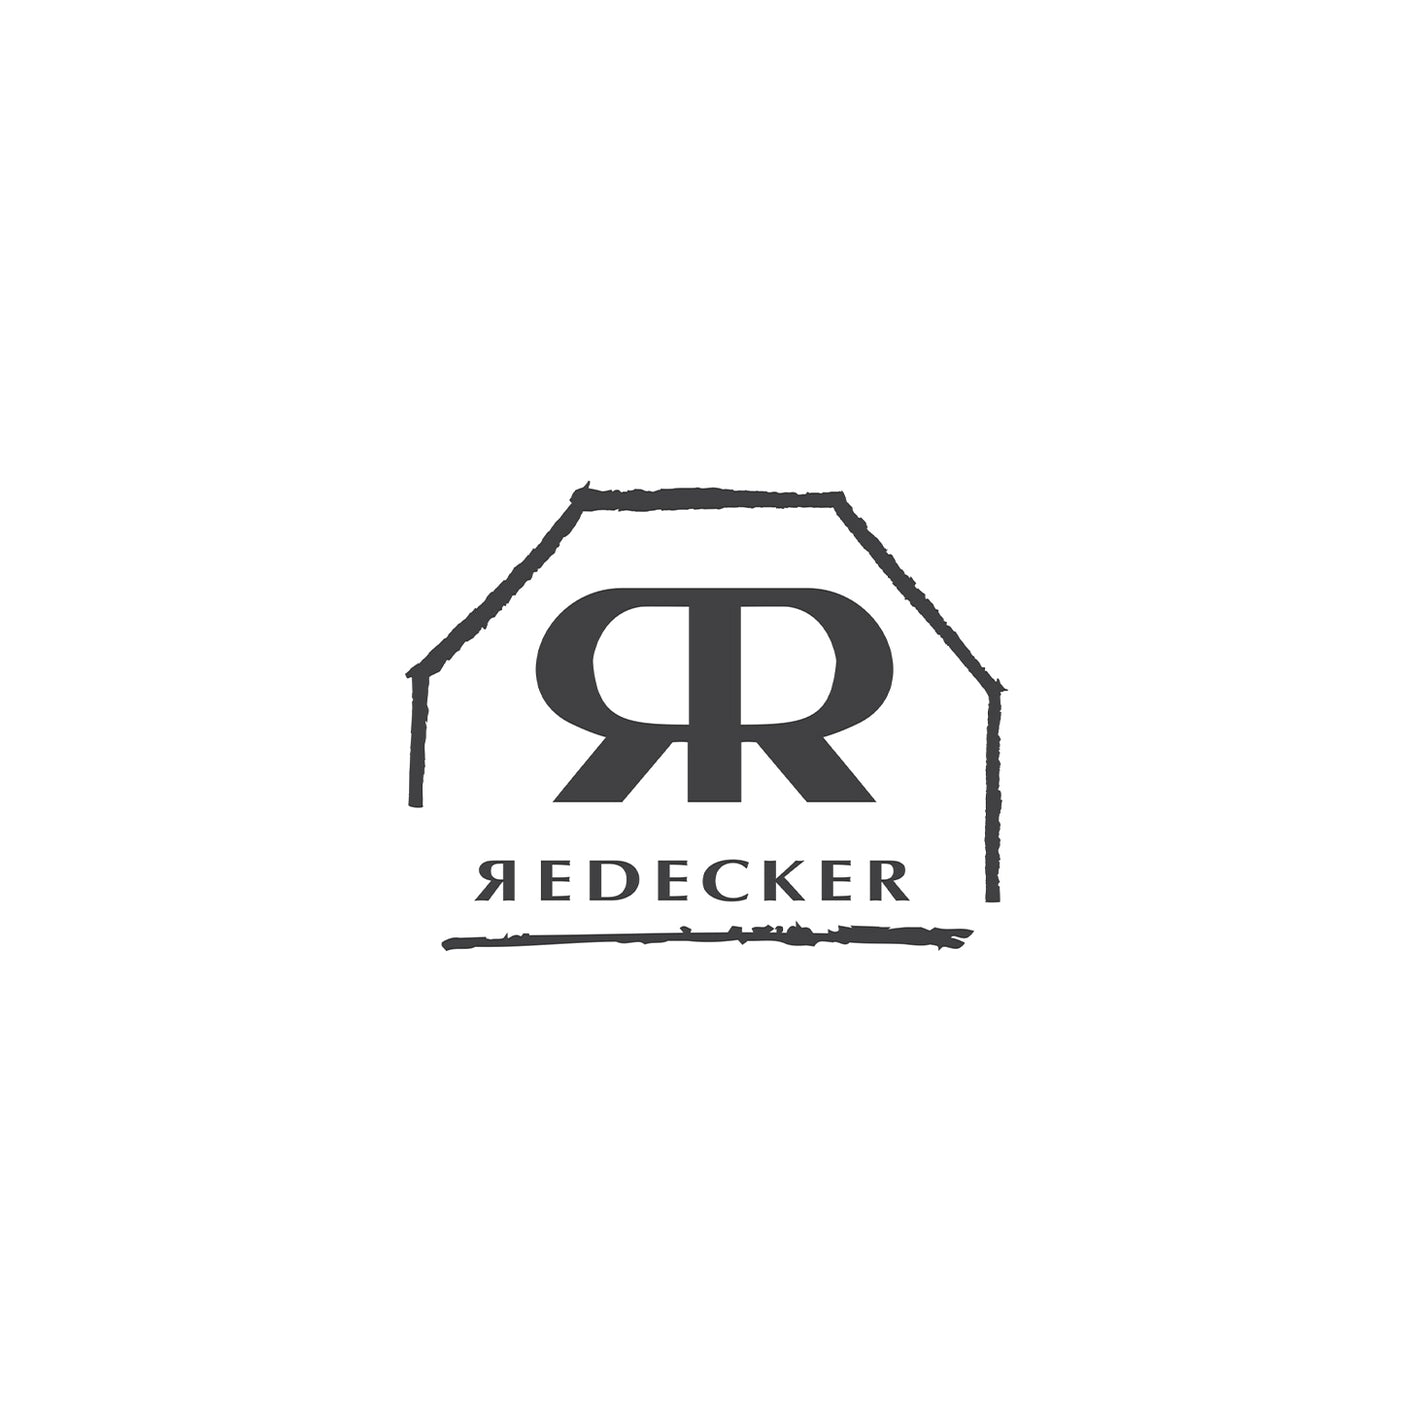 Redecker Shoe Shine Box with Lid - Wooden